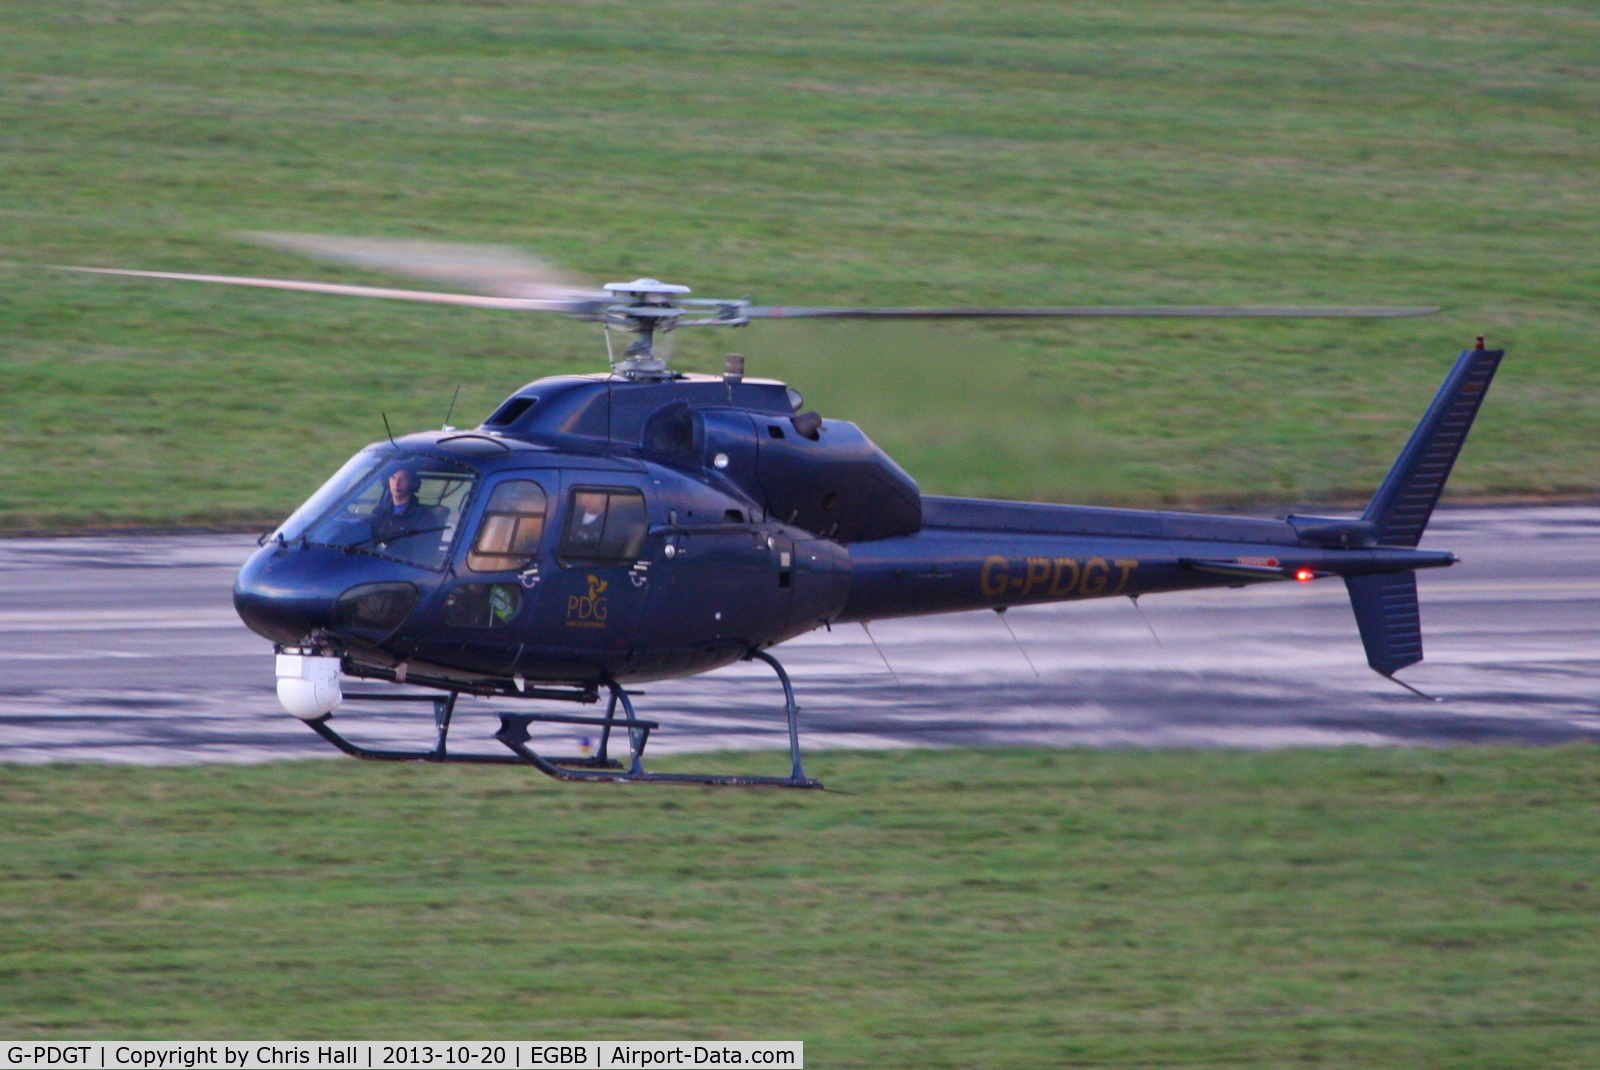 G-PDGT, 1988 Aerospatiale AS-355F-2 Ecureuil 2 C/N 5374, PDG Helicopters